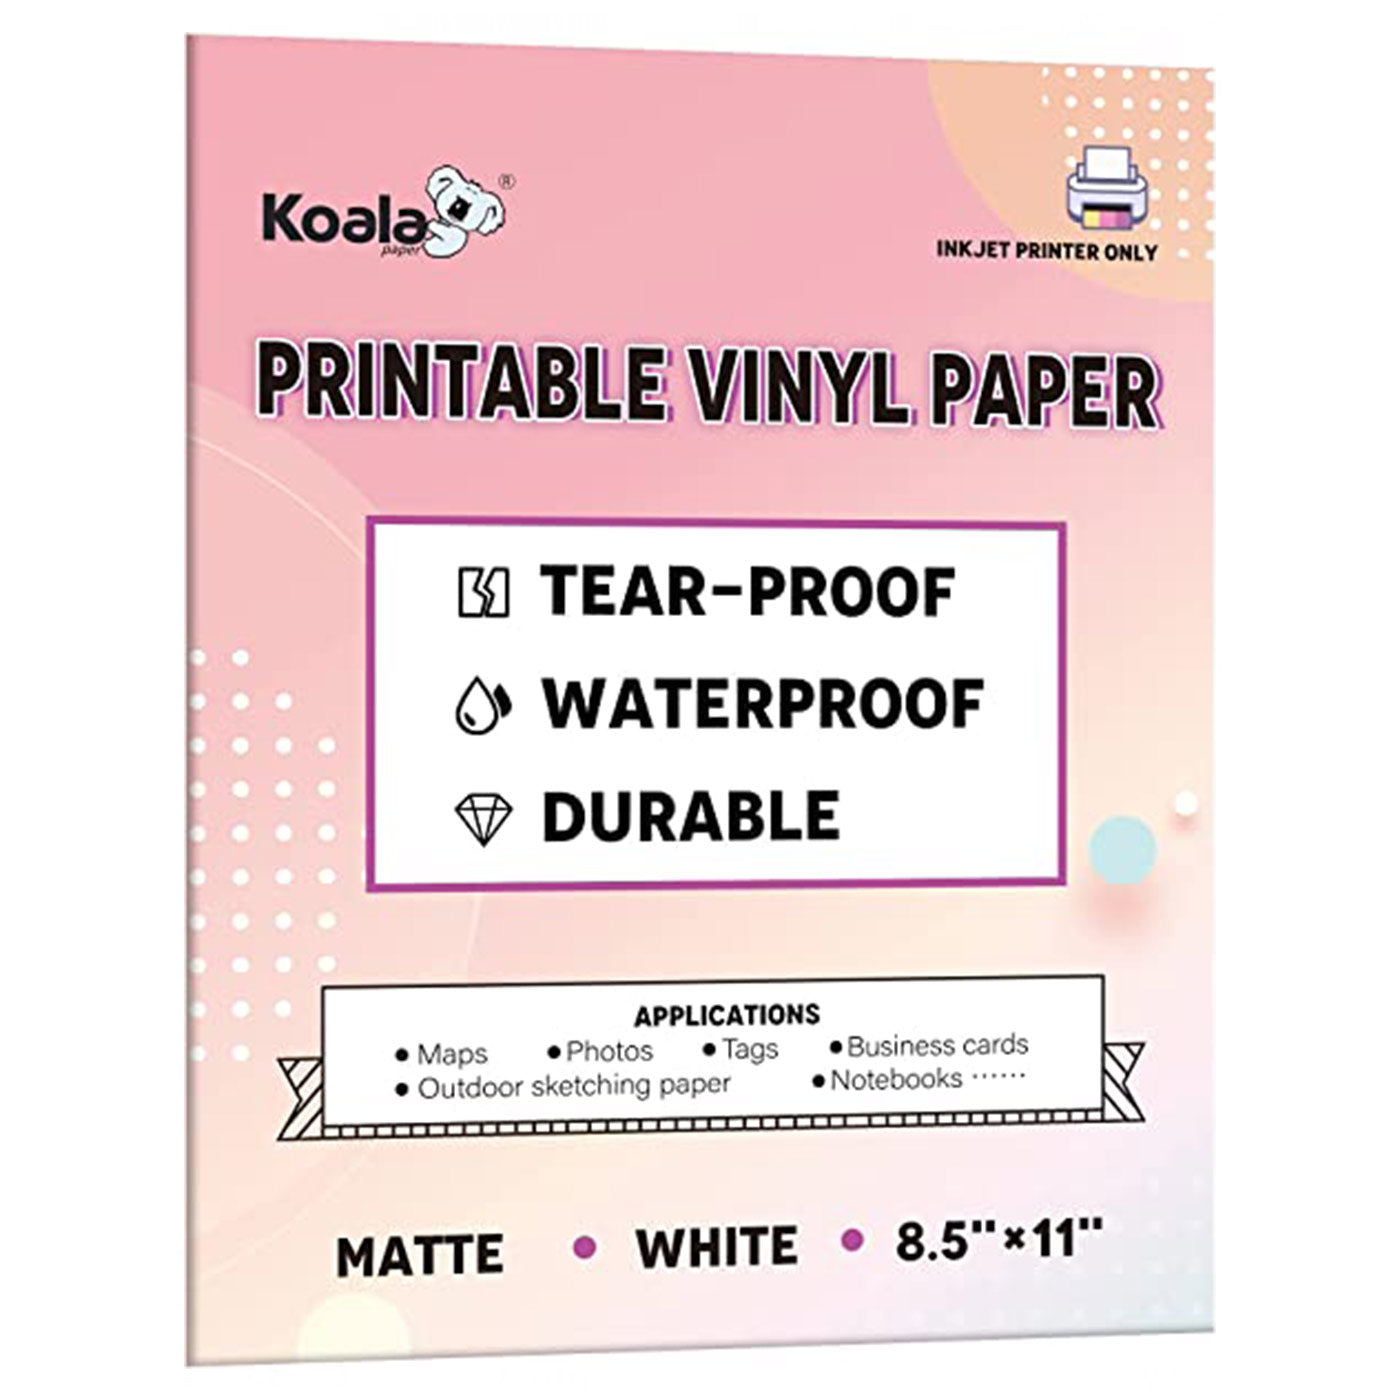 120 Sheets Koala Printable Sticker Paper for Printers, Glossy White Full Sheet Lable Paper for Inkjet Printer , Self-Adhesive Glossy Paper DIY Decals